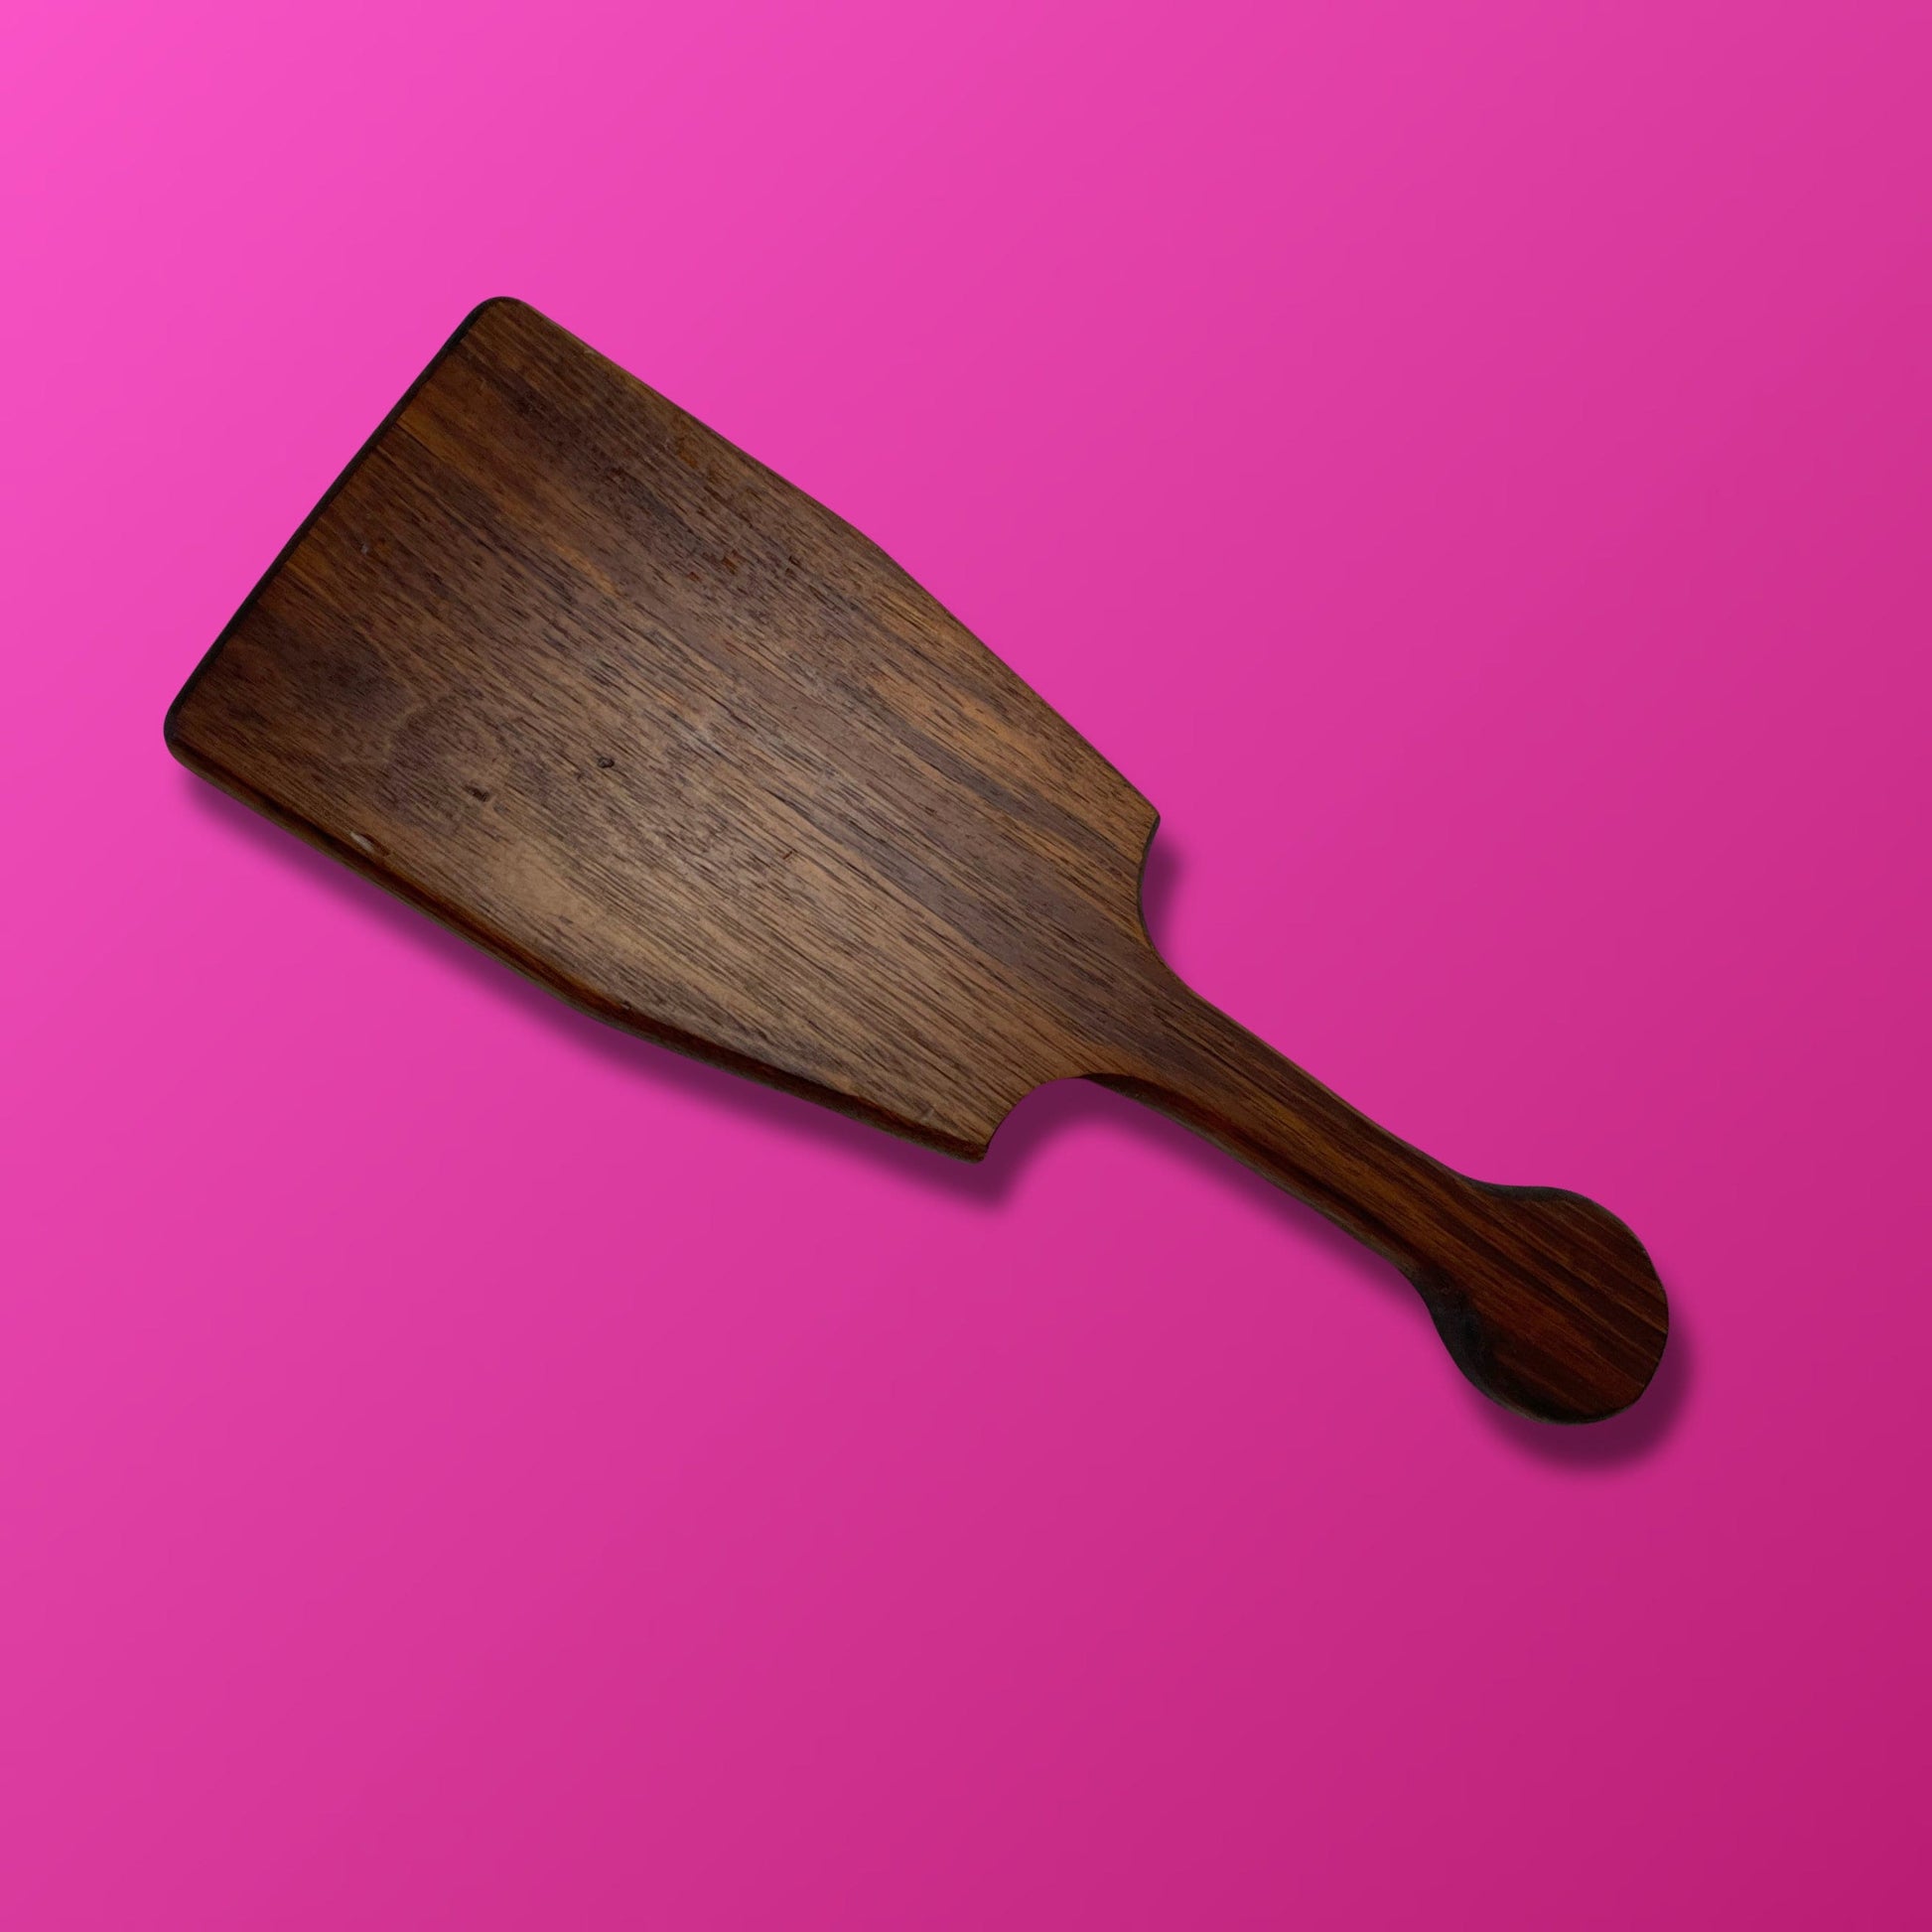 Hand Mirror Spanking Paddle, Wooden Spanking Paddle, Impact BDSM Paddl –  Toasty Contraptions